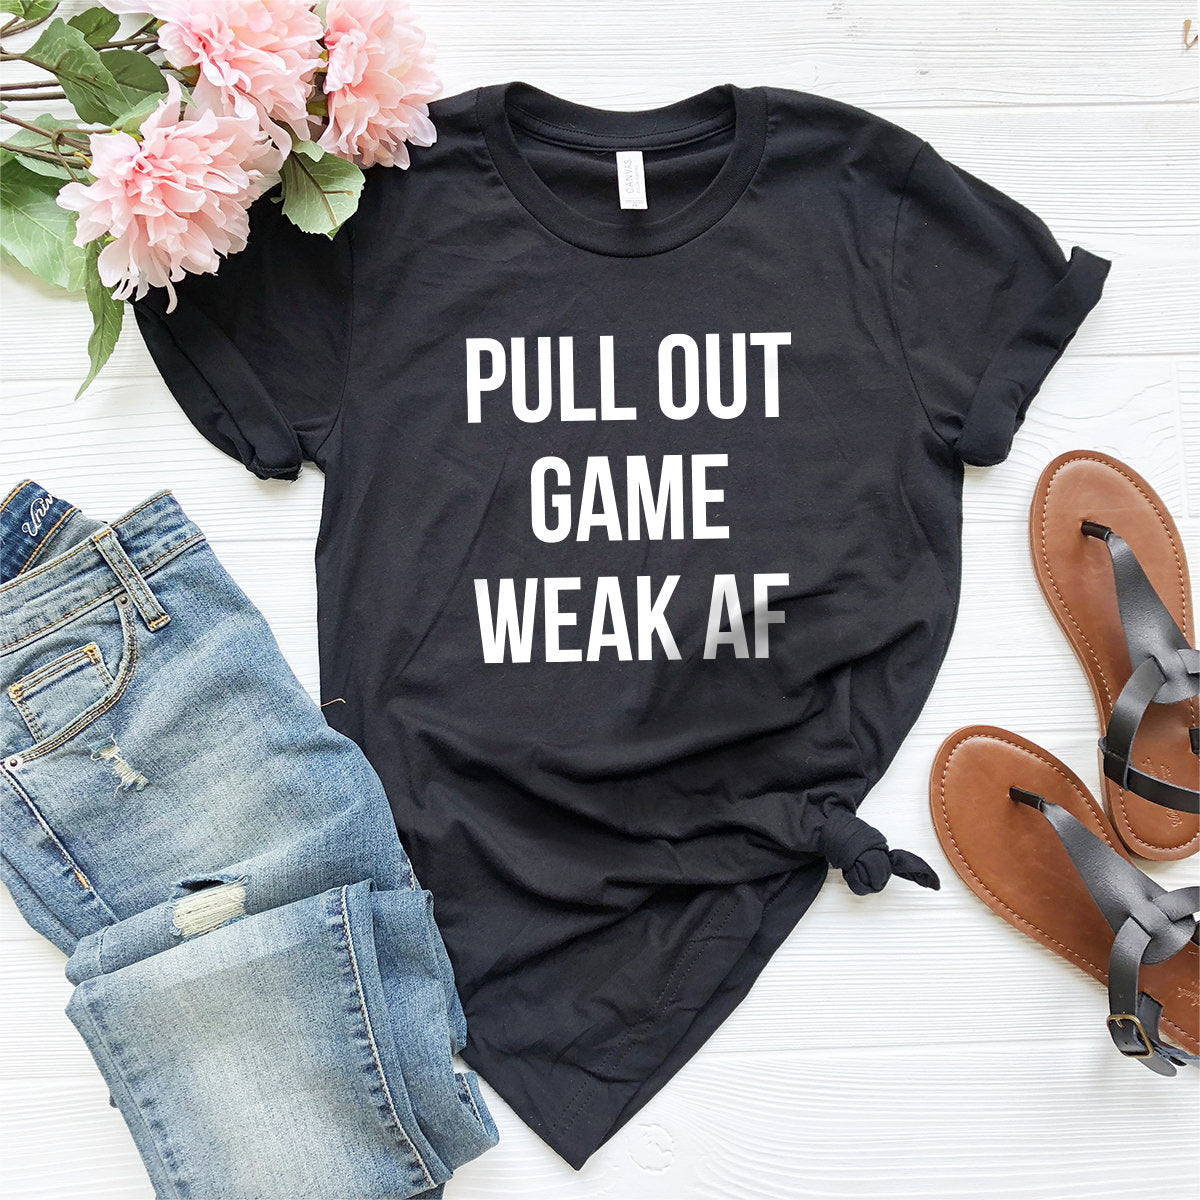 Funny Dad Shirt, Dadlife Shirt , Dad Gift, Pull Out Game Weak Af T Shirt, Fatherhood Shirt, Funny Daddy Shirt, Graphic Tee For Dad - Fastdeliverytees.com